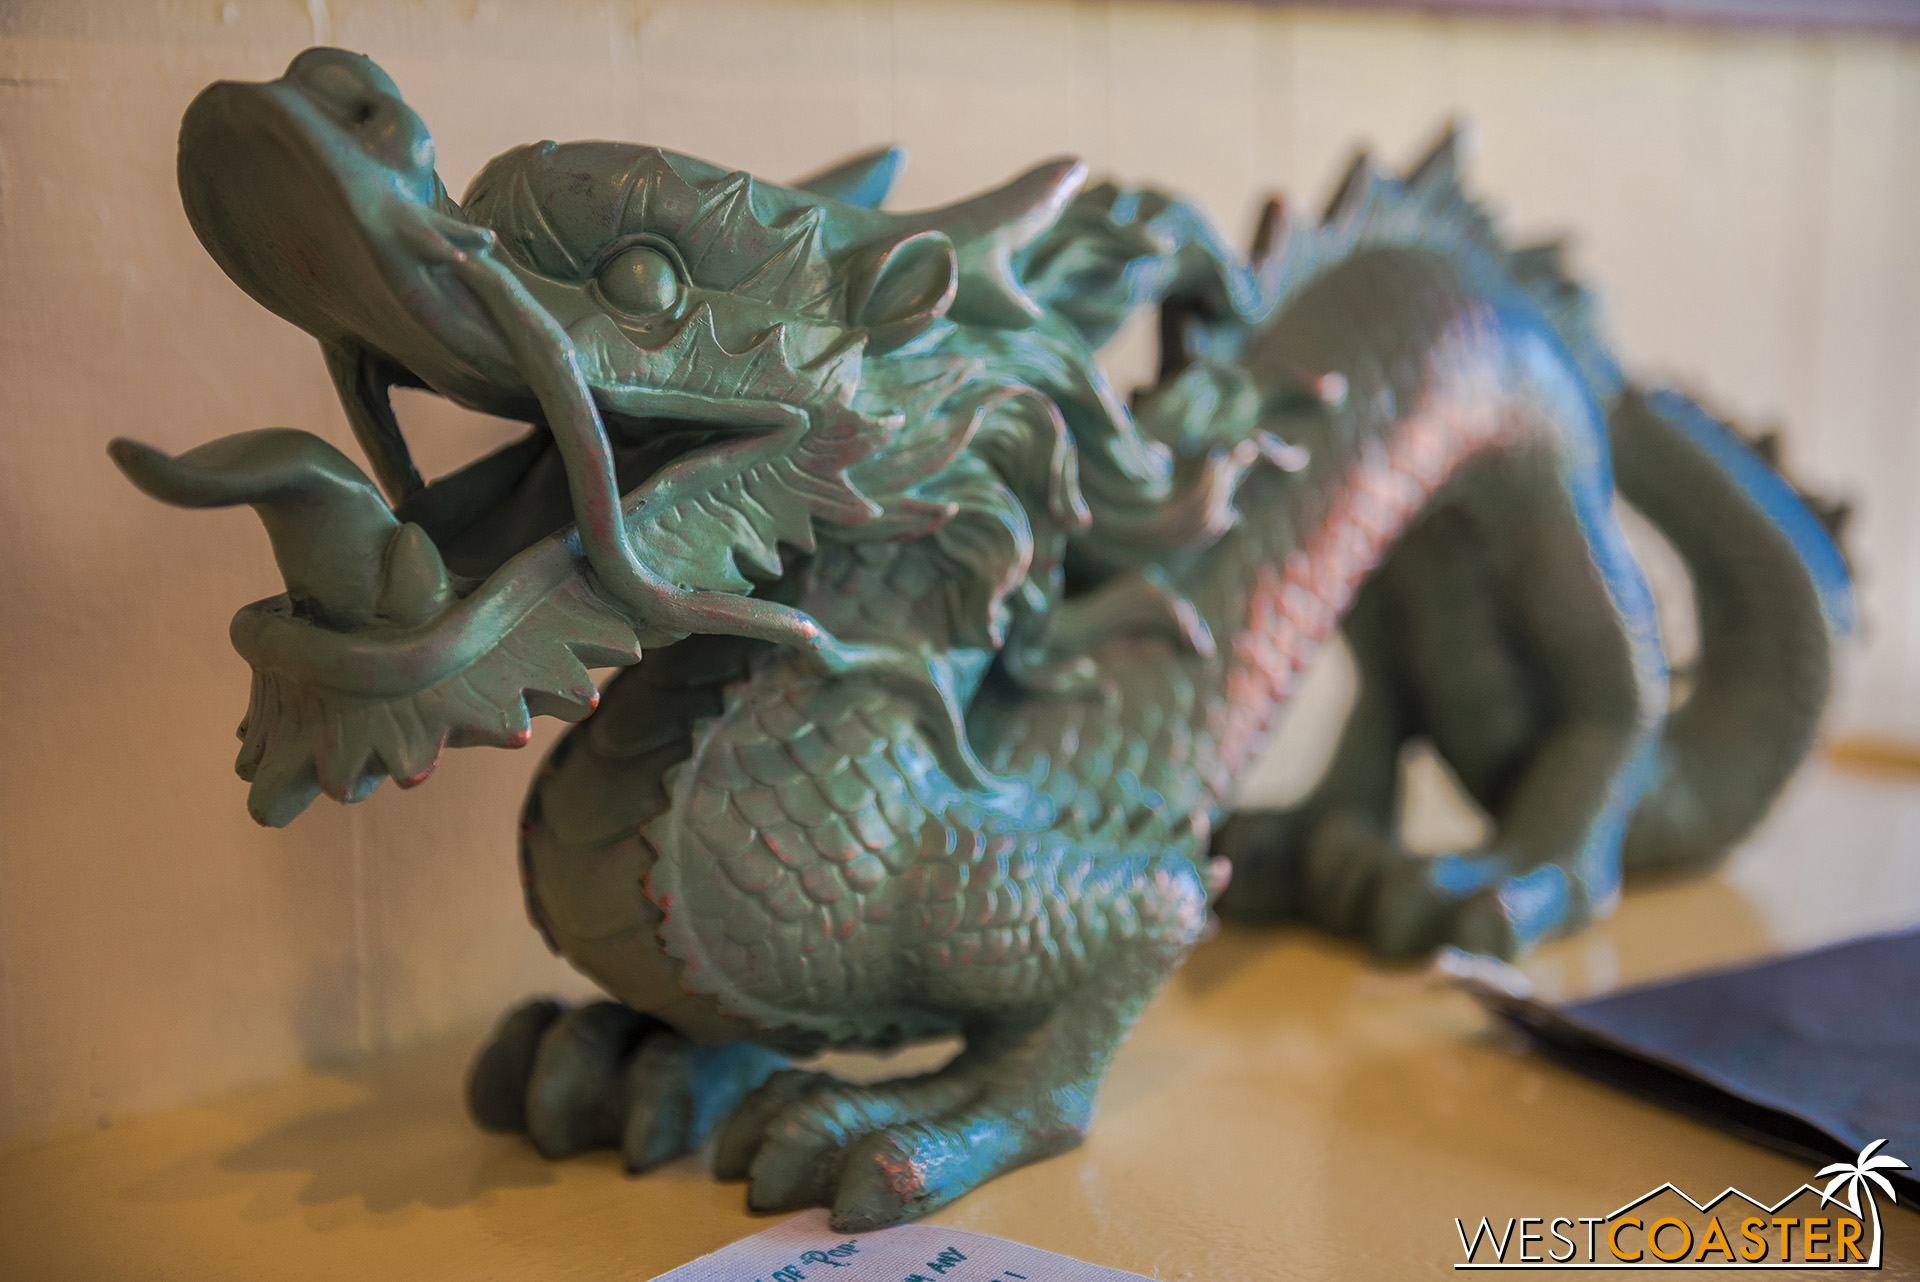  it’s become a bit of a scavenger hunt to find out where to place the jade dragon, Pop Wing Lee’s most prized possession. 